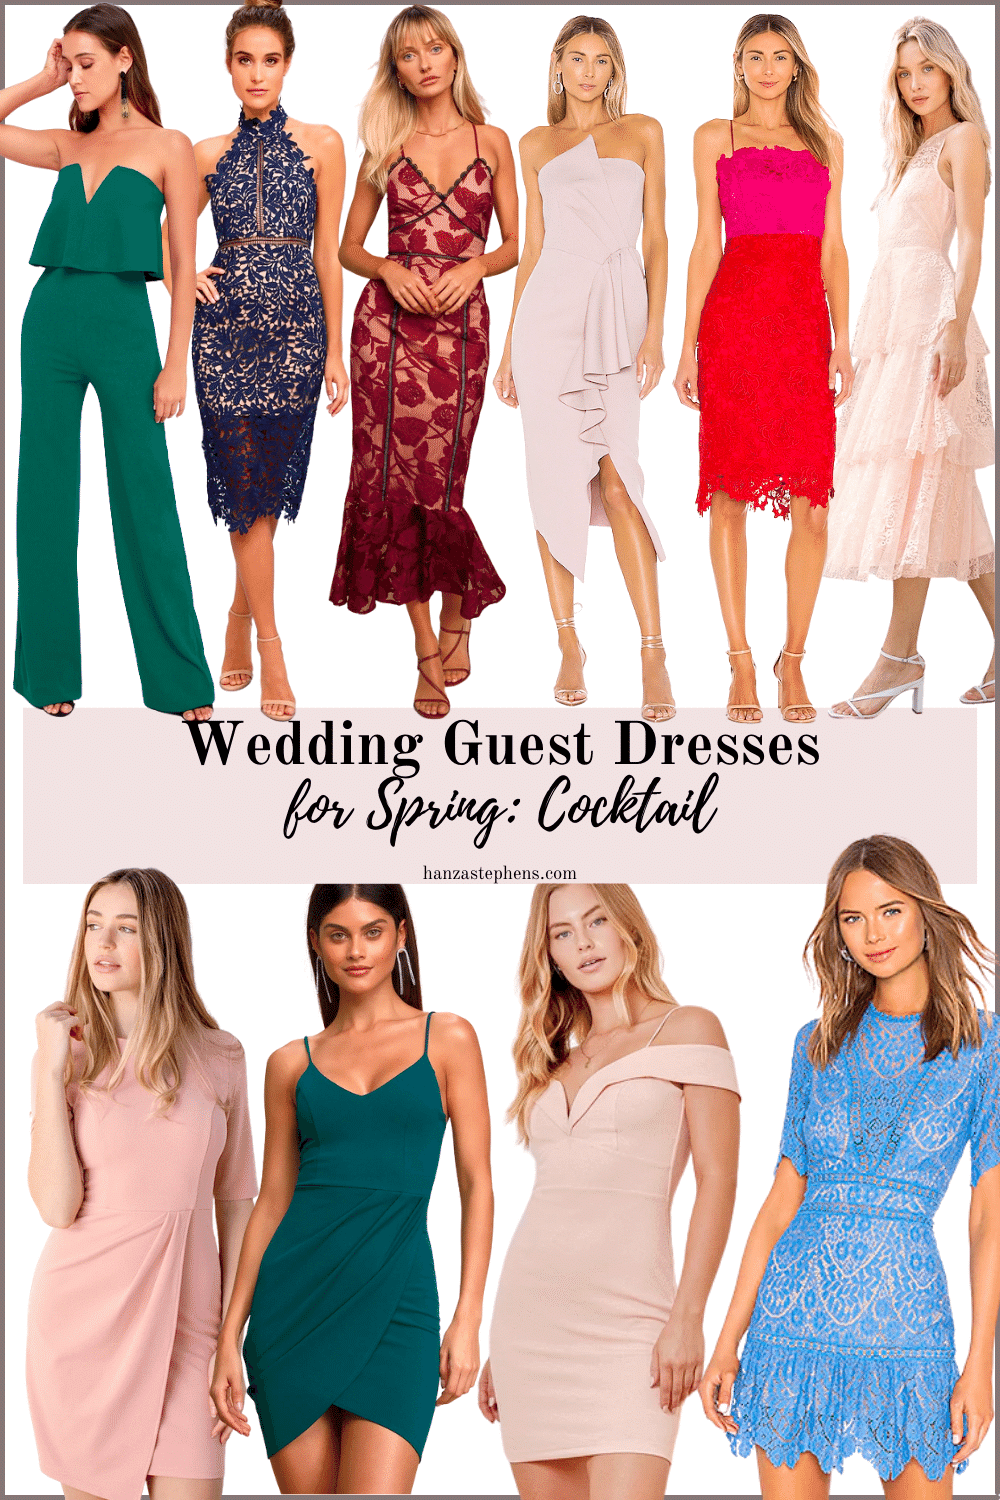 The Ultimate Wedding Guest Dress Guide ...